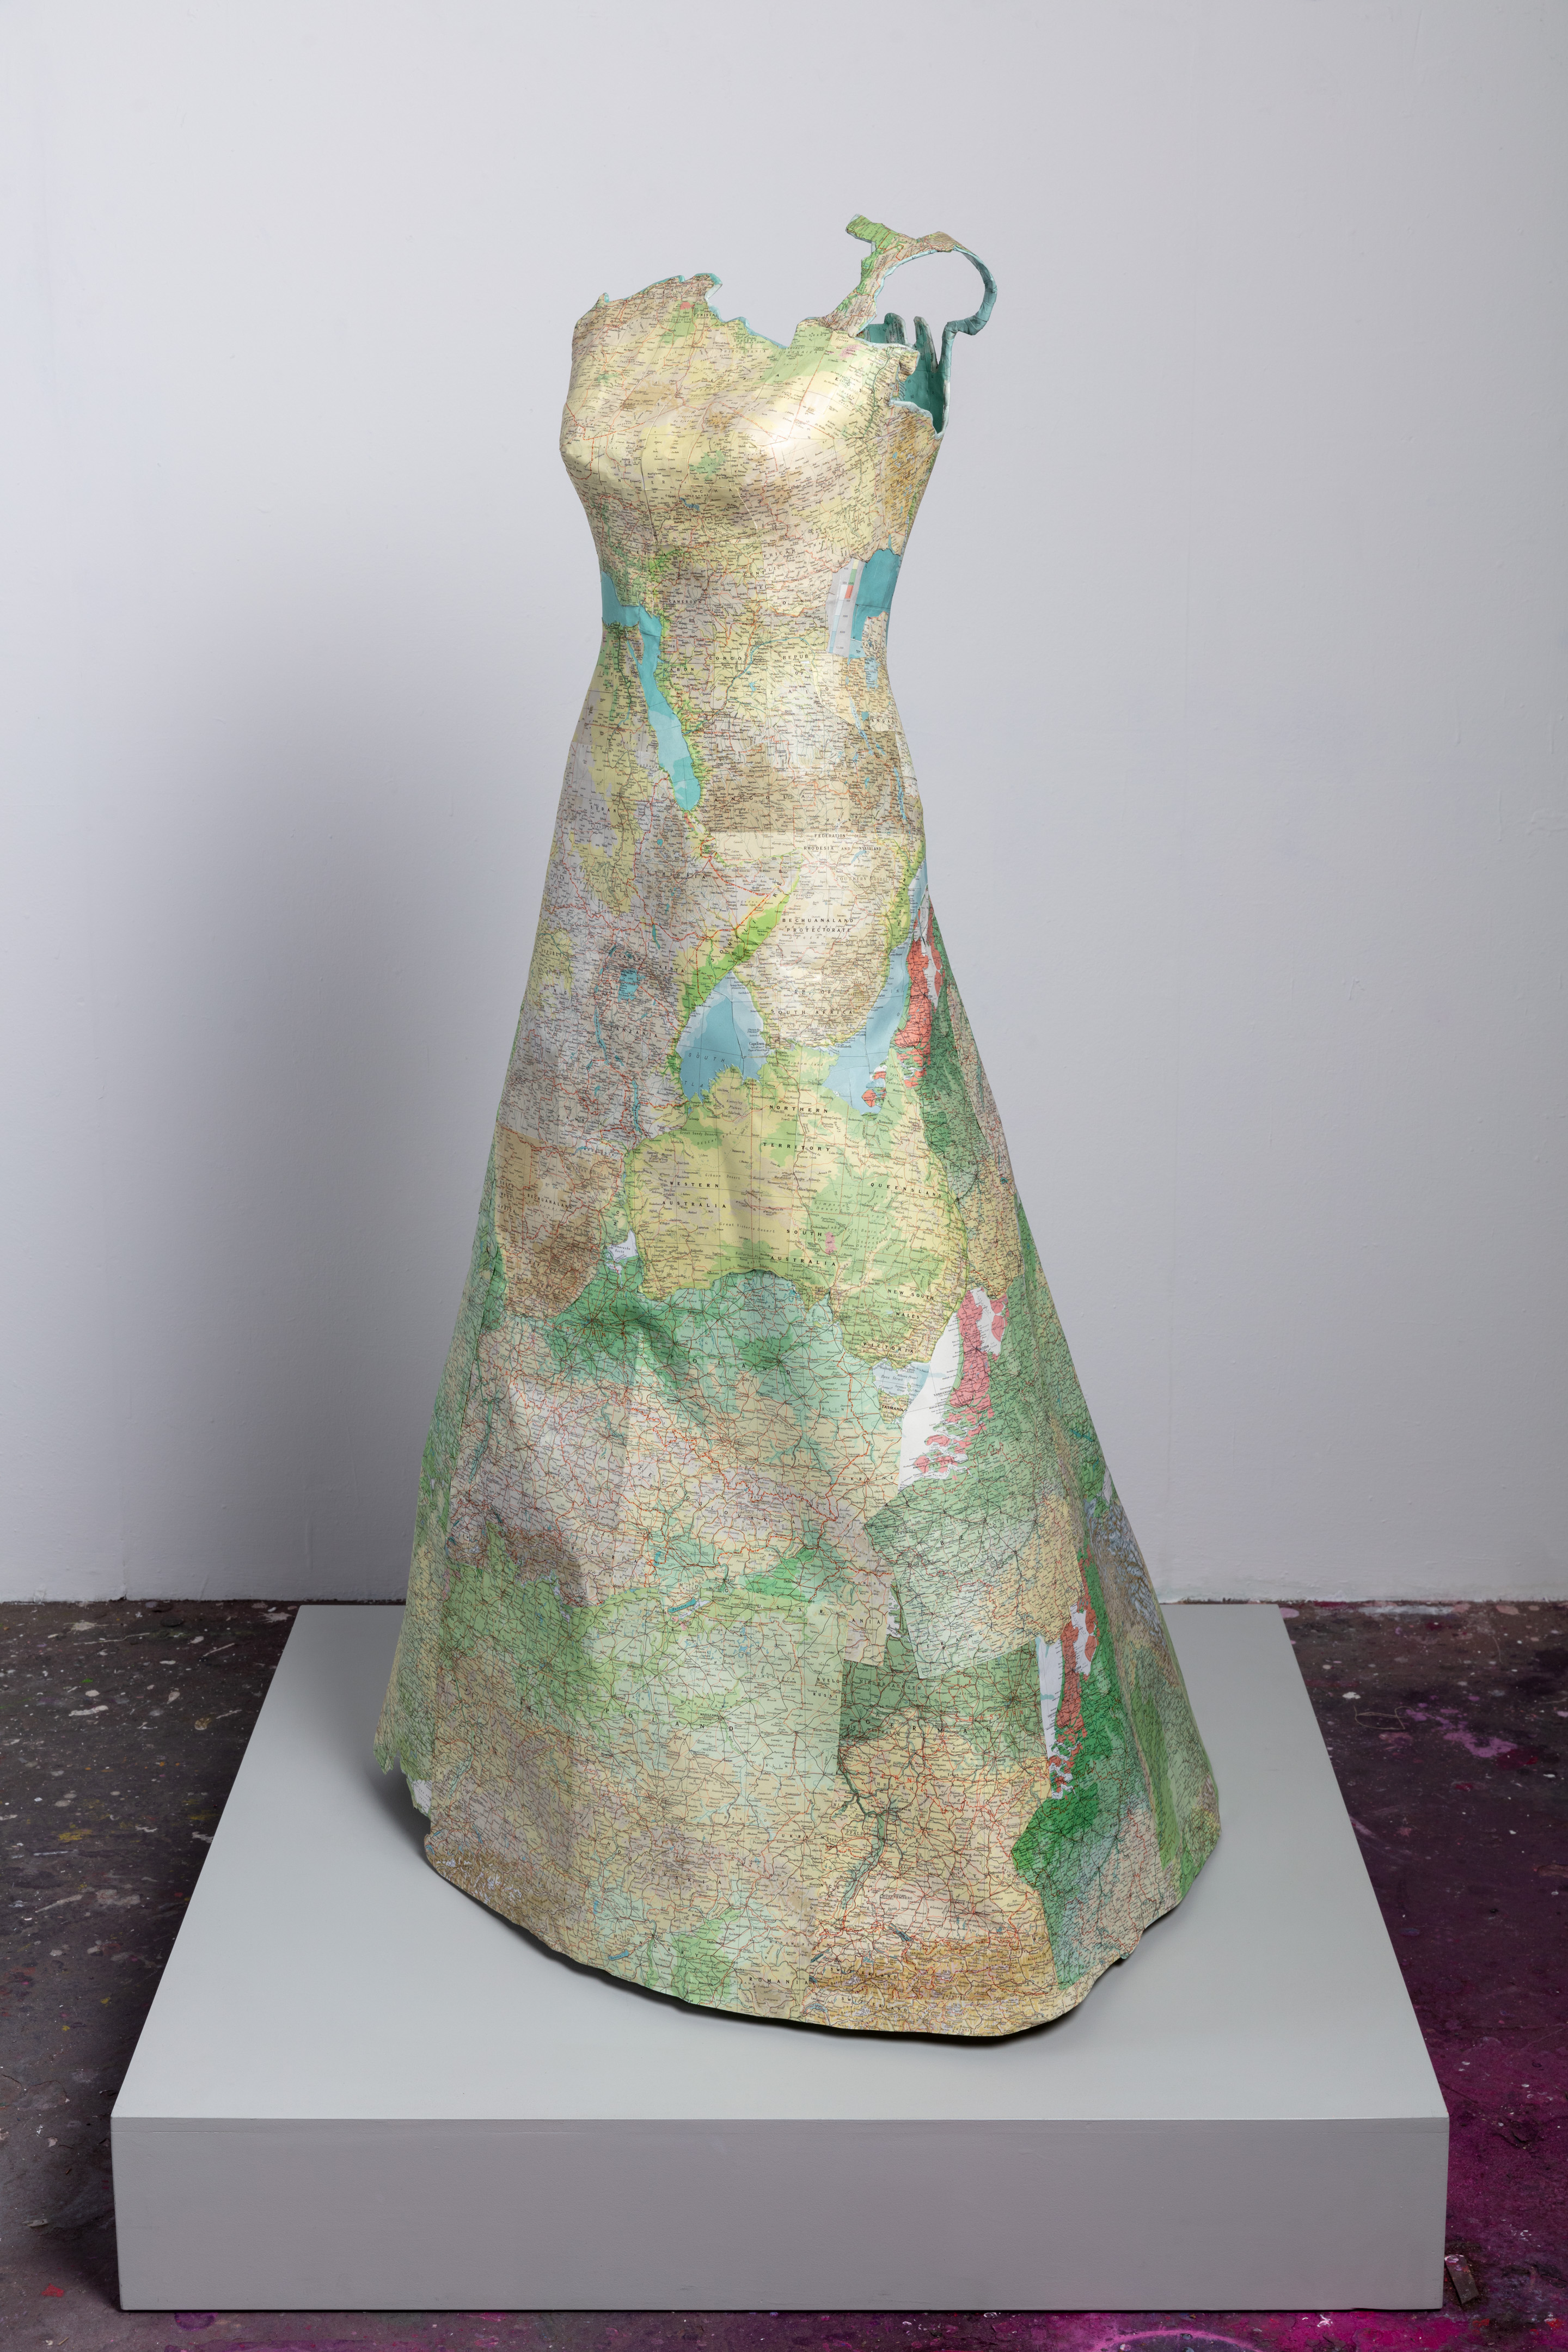 Susan Stockwell, Cartographic Dress, Paper maps, 150 x 70 cm, 2019